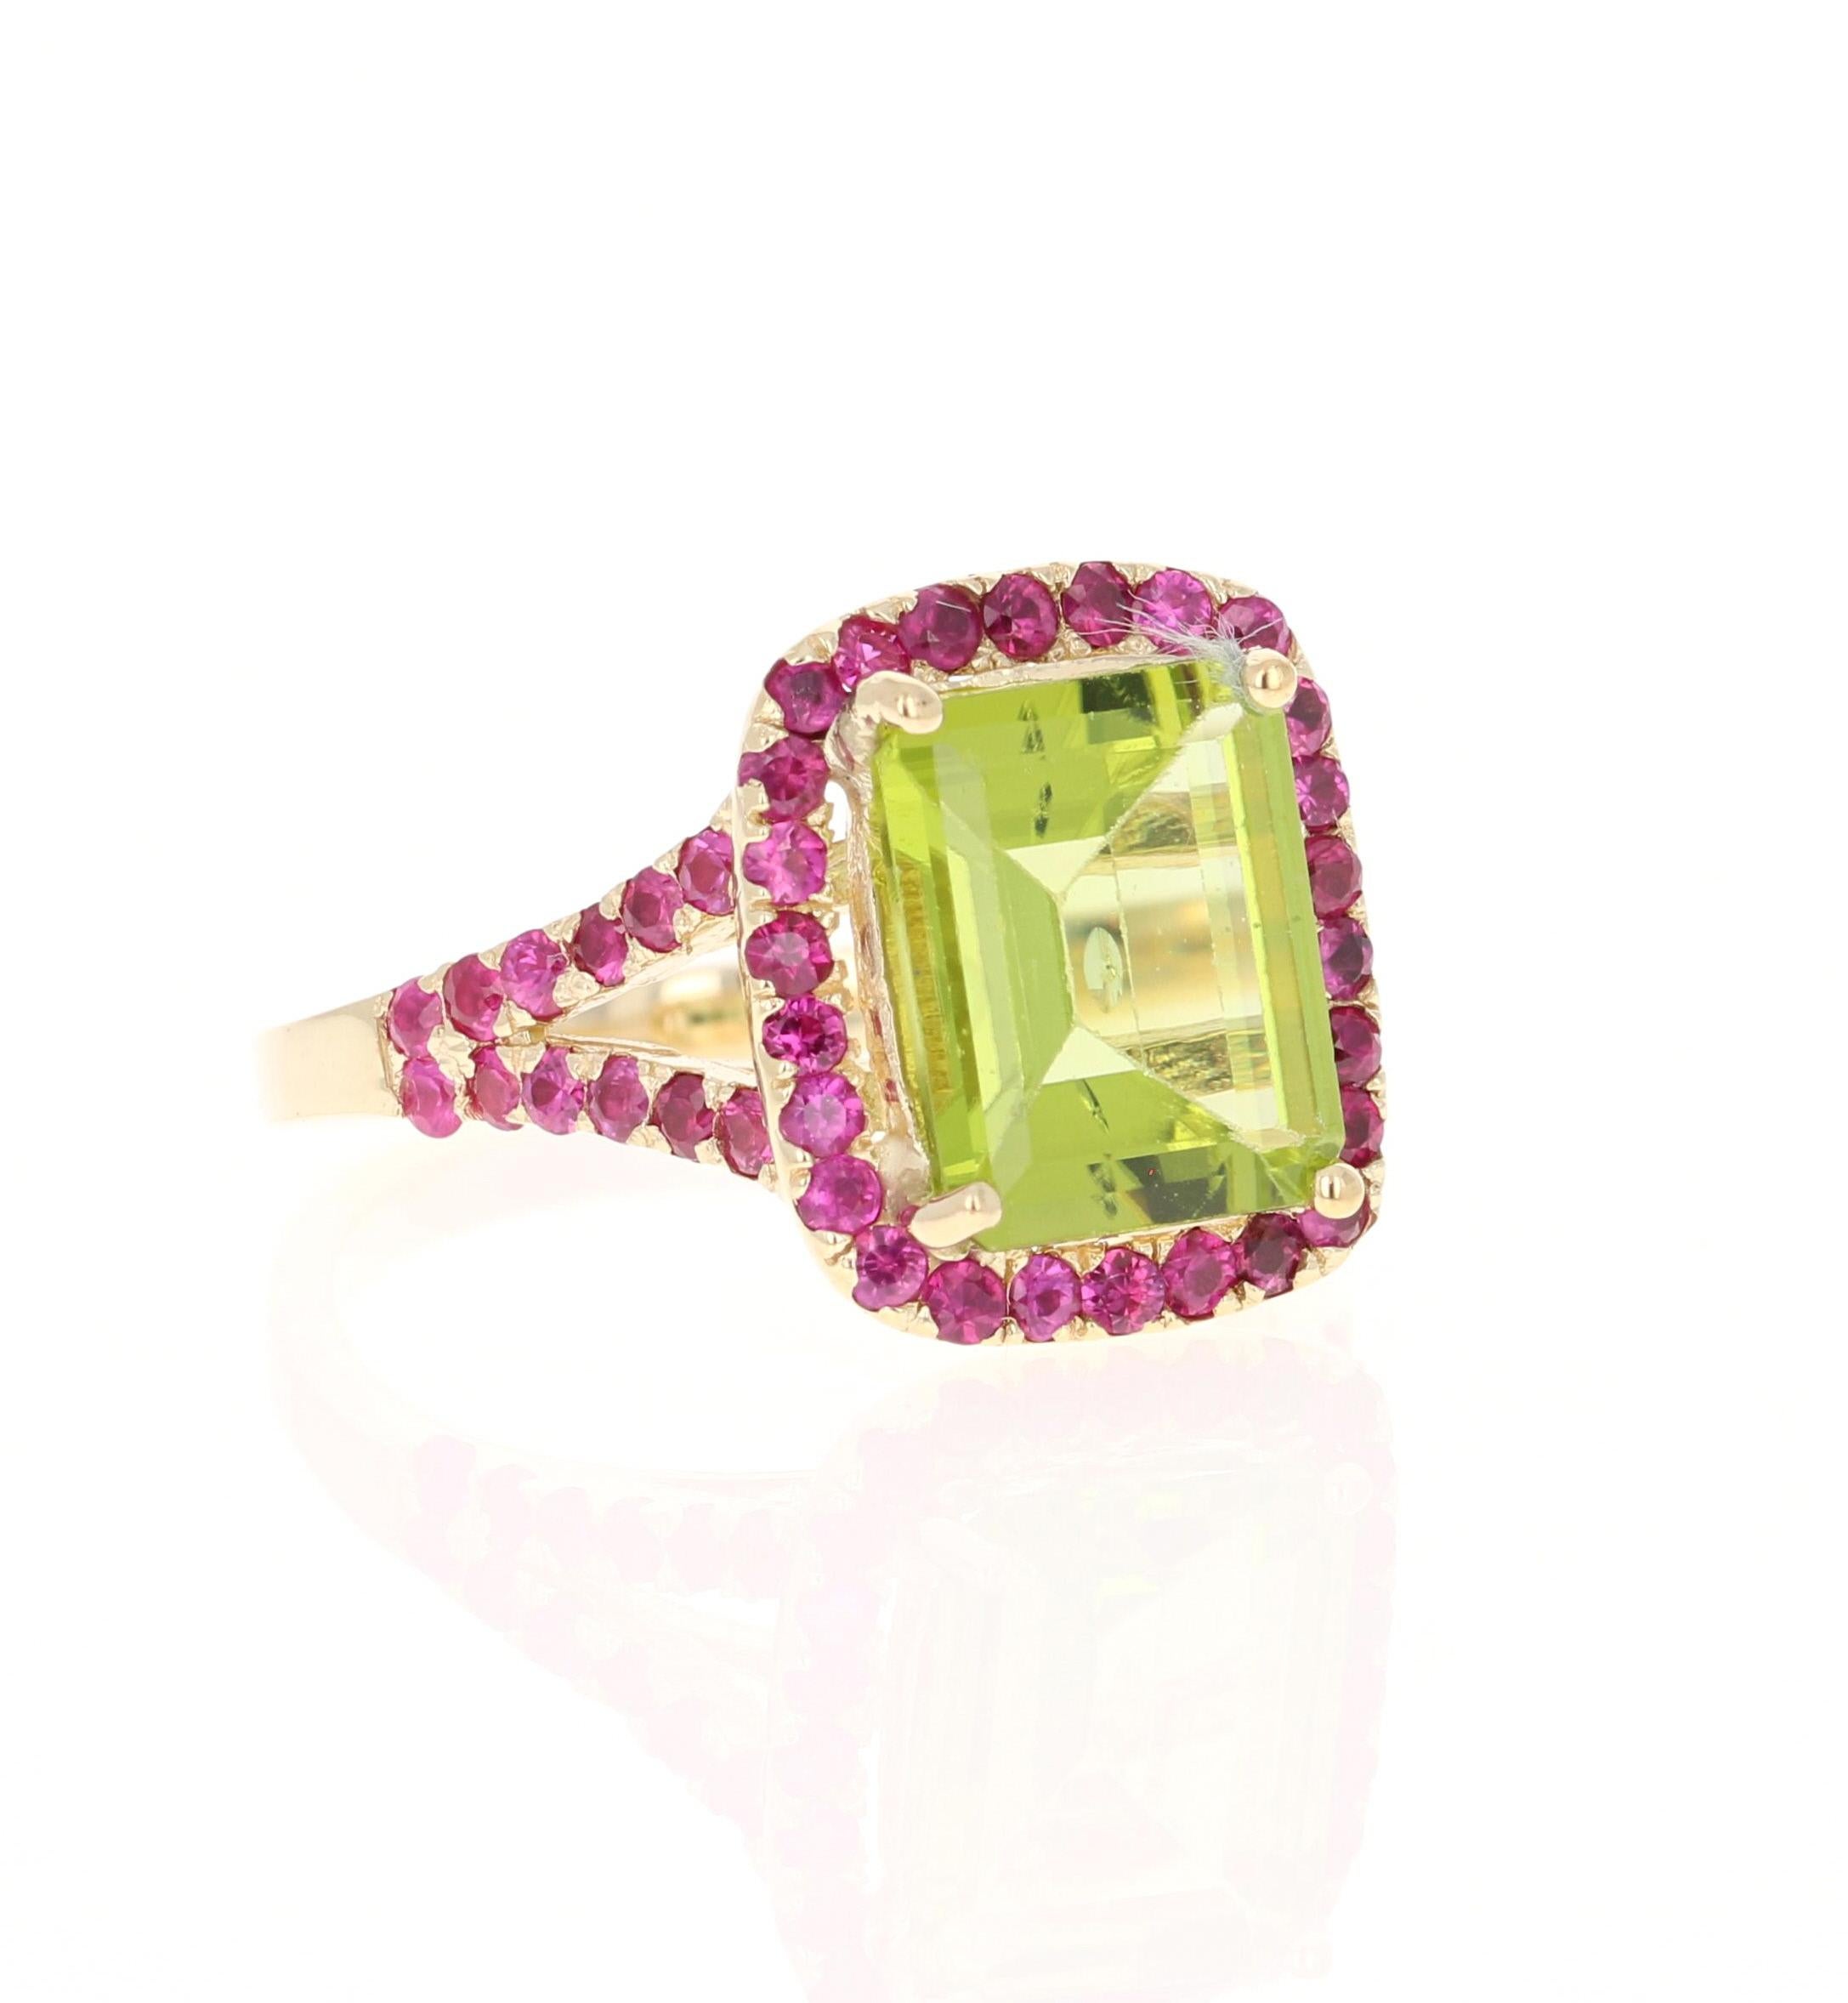 This ring has a 2.83 carat Peridot and 52 Pink Sapphires that weigh 1.10 Carats. The total carat weight of the ring is 3.93 Carats. 
Curated in 14 Karat Yellow Gold and weighs approximately 4.2 grams. 

The ring size is 7 and can be re-sized if